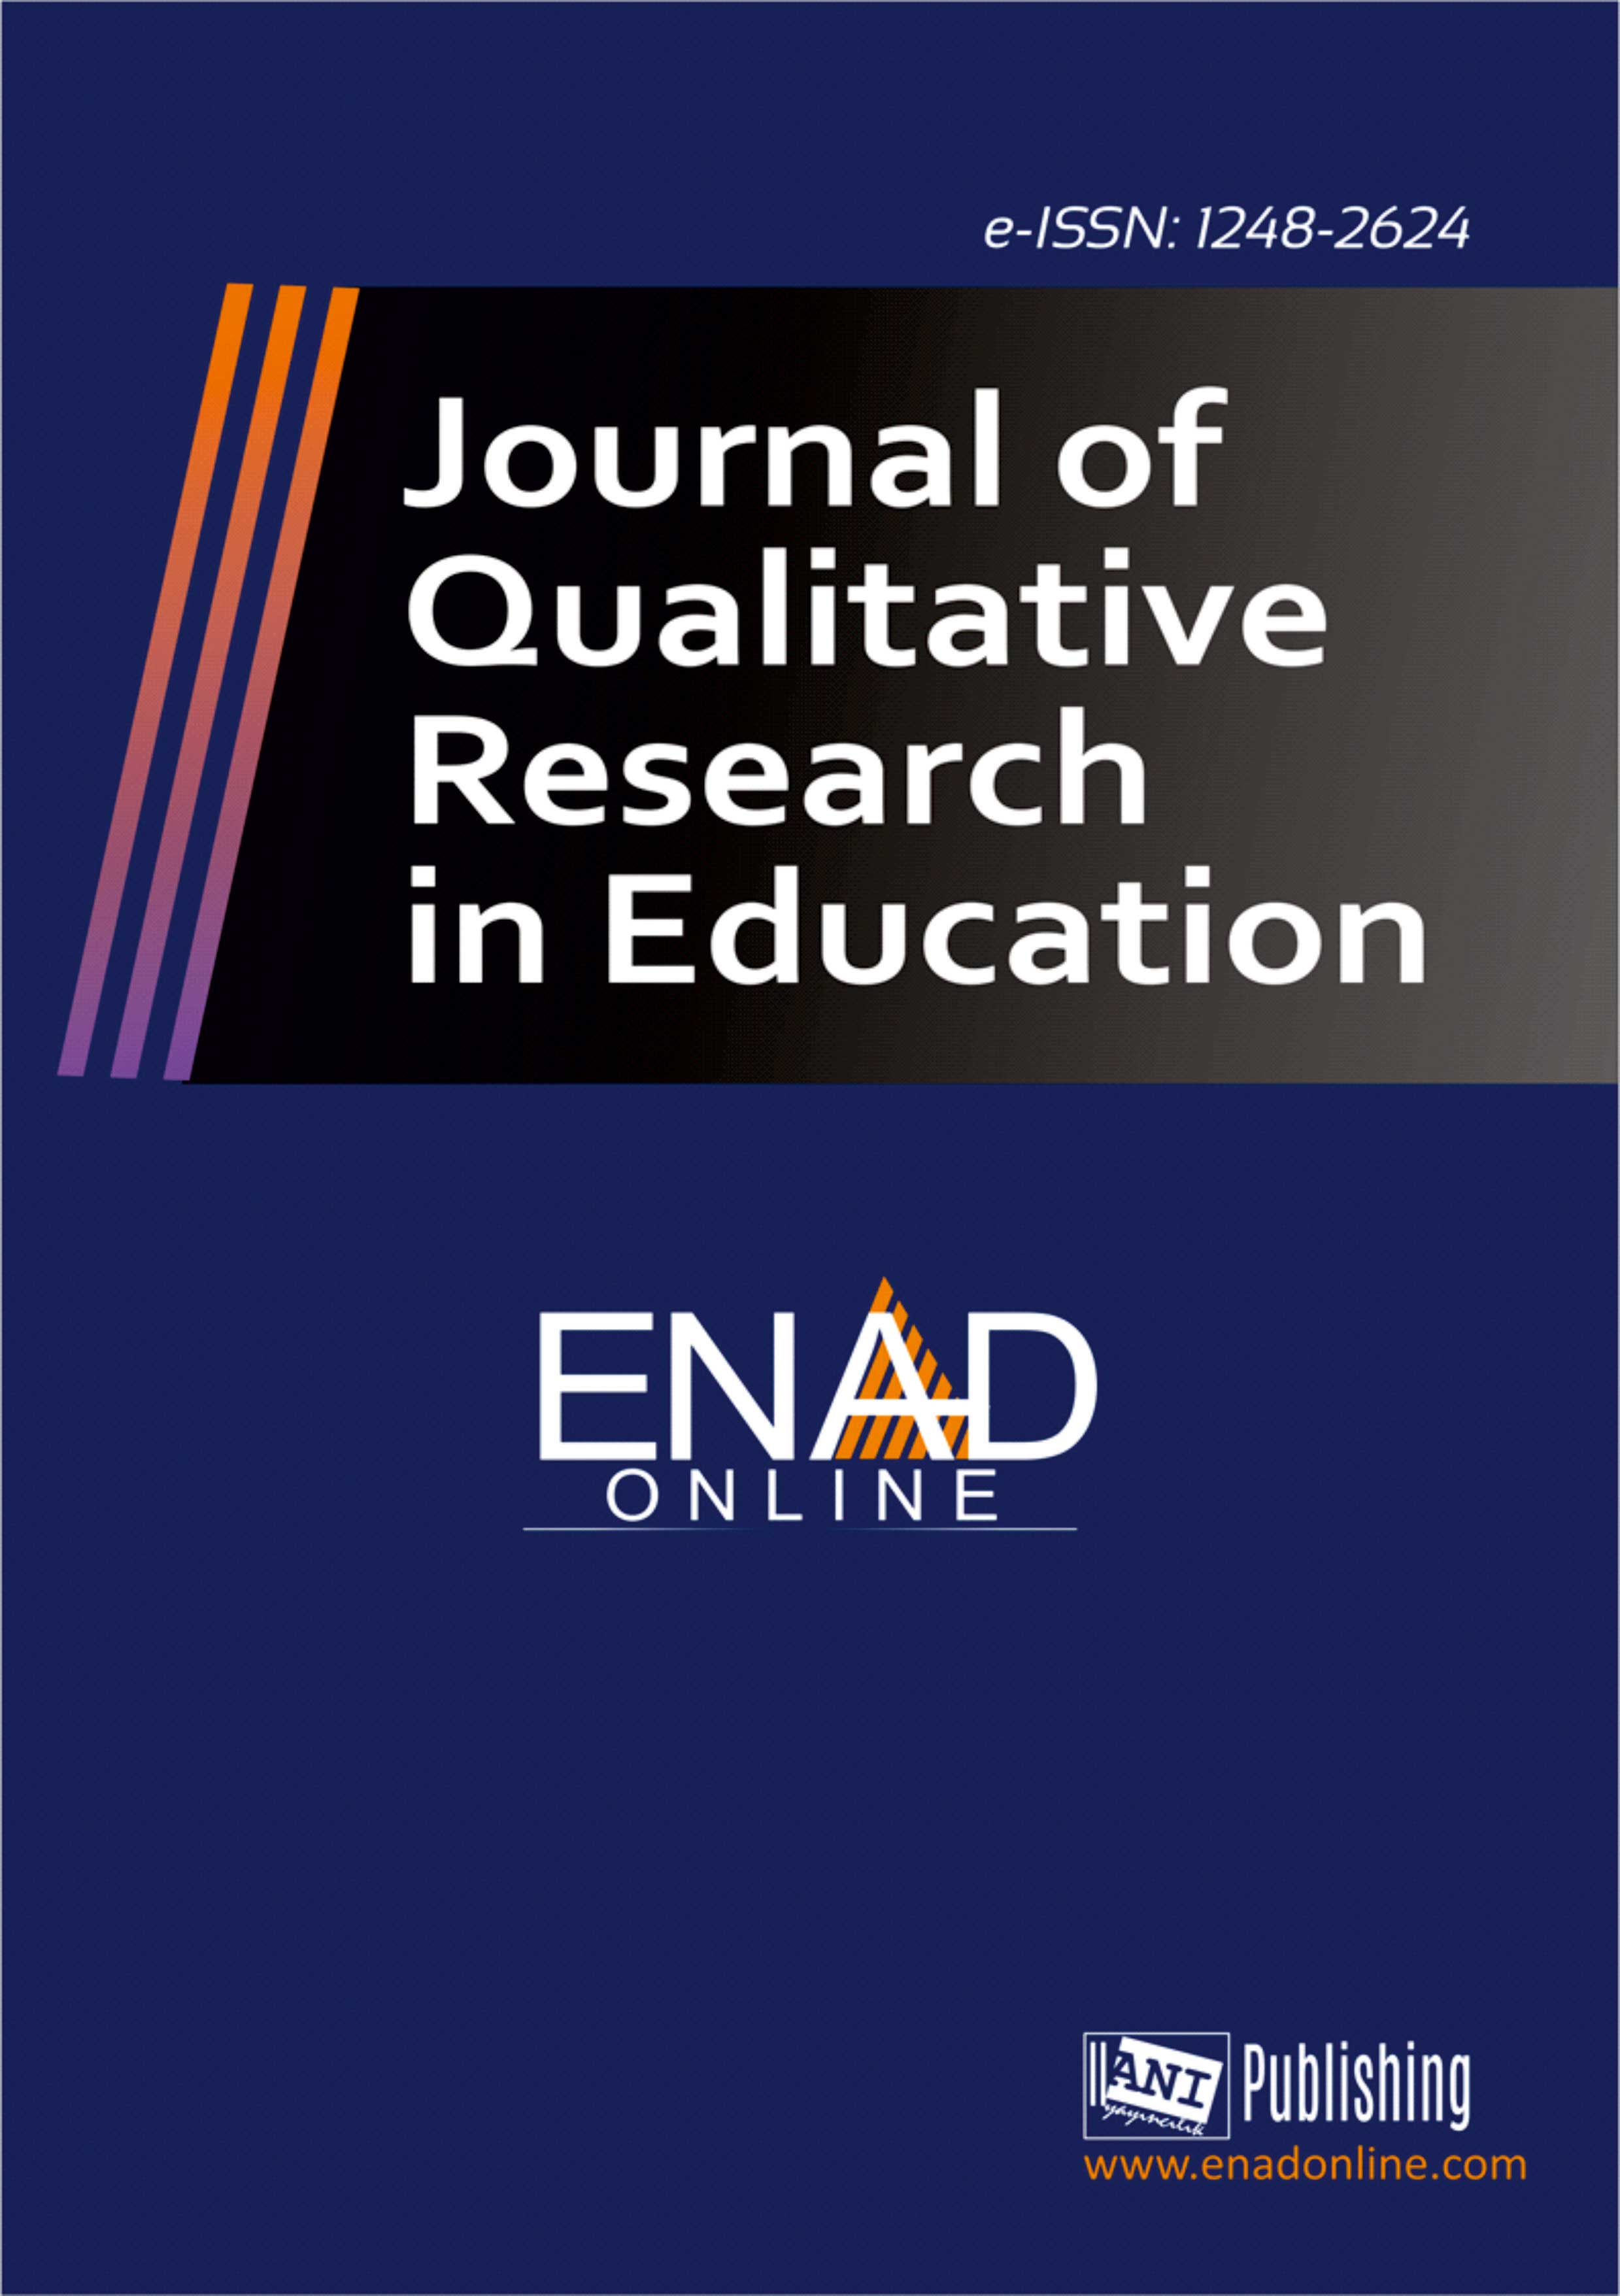 					View Vol. 5 Issue 2 (2017): Journal of Qualitative Research in Education
				